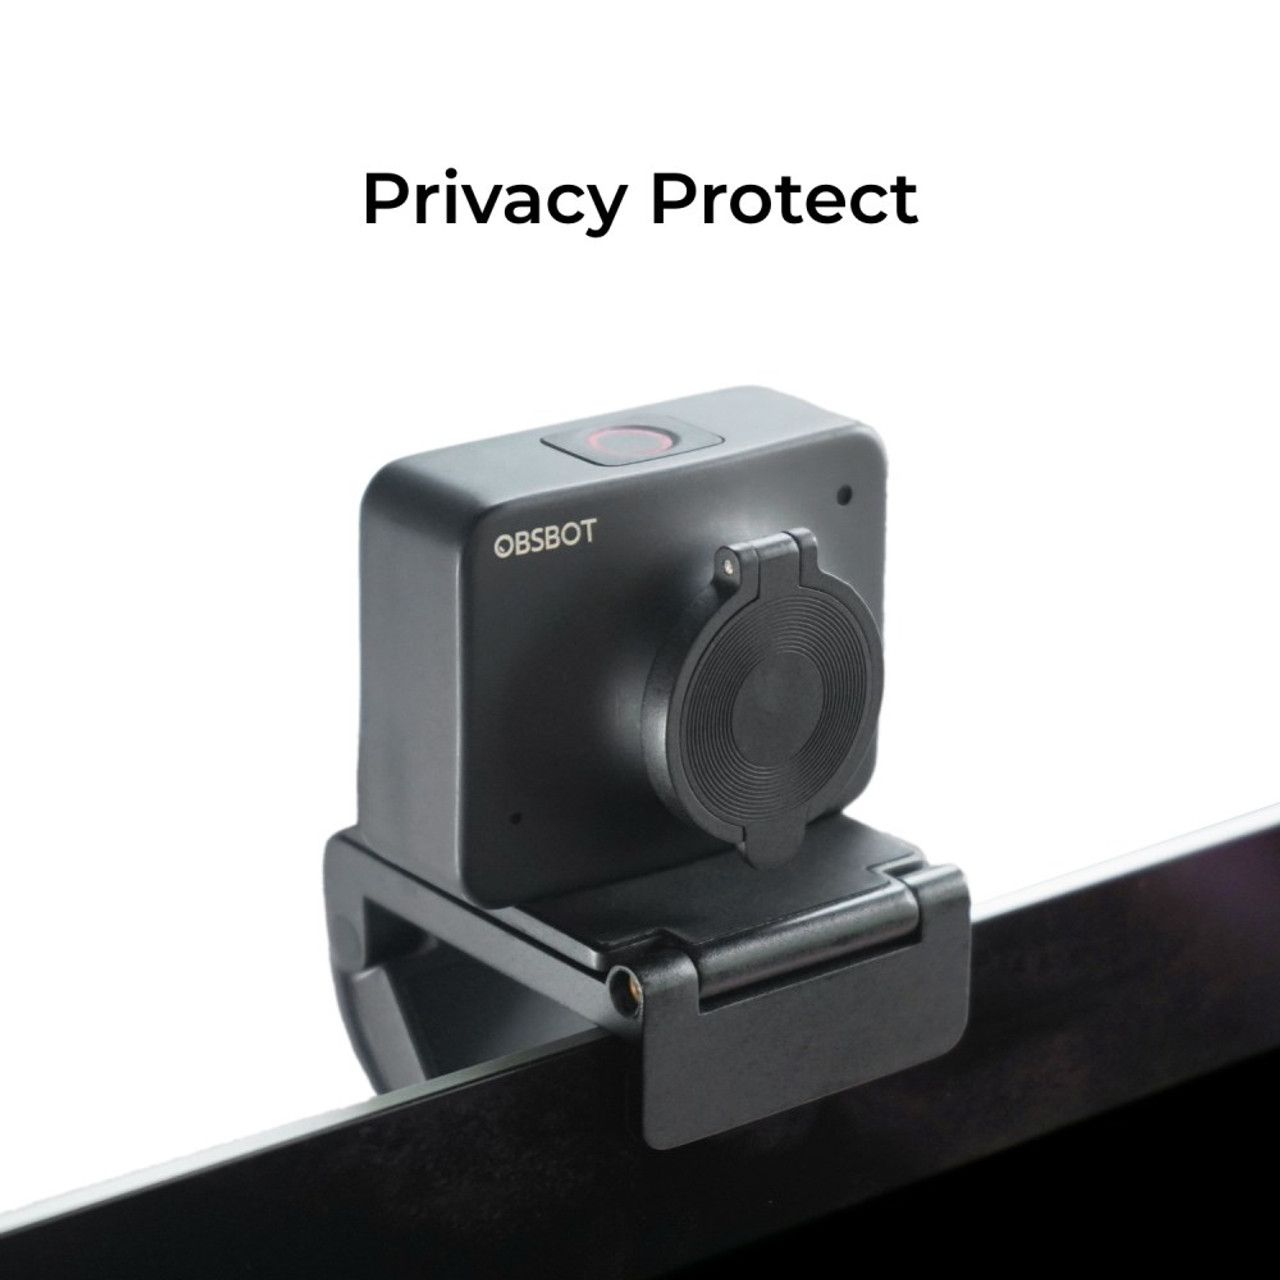 OBSBOT Meet Privacy Cover